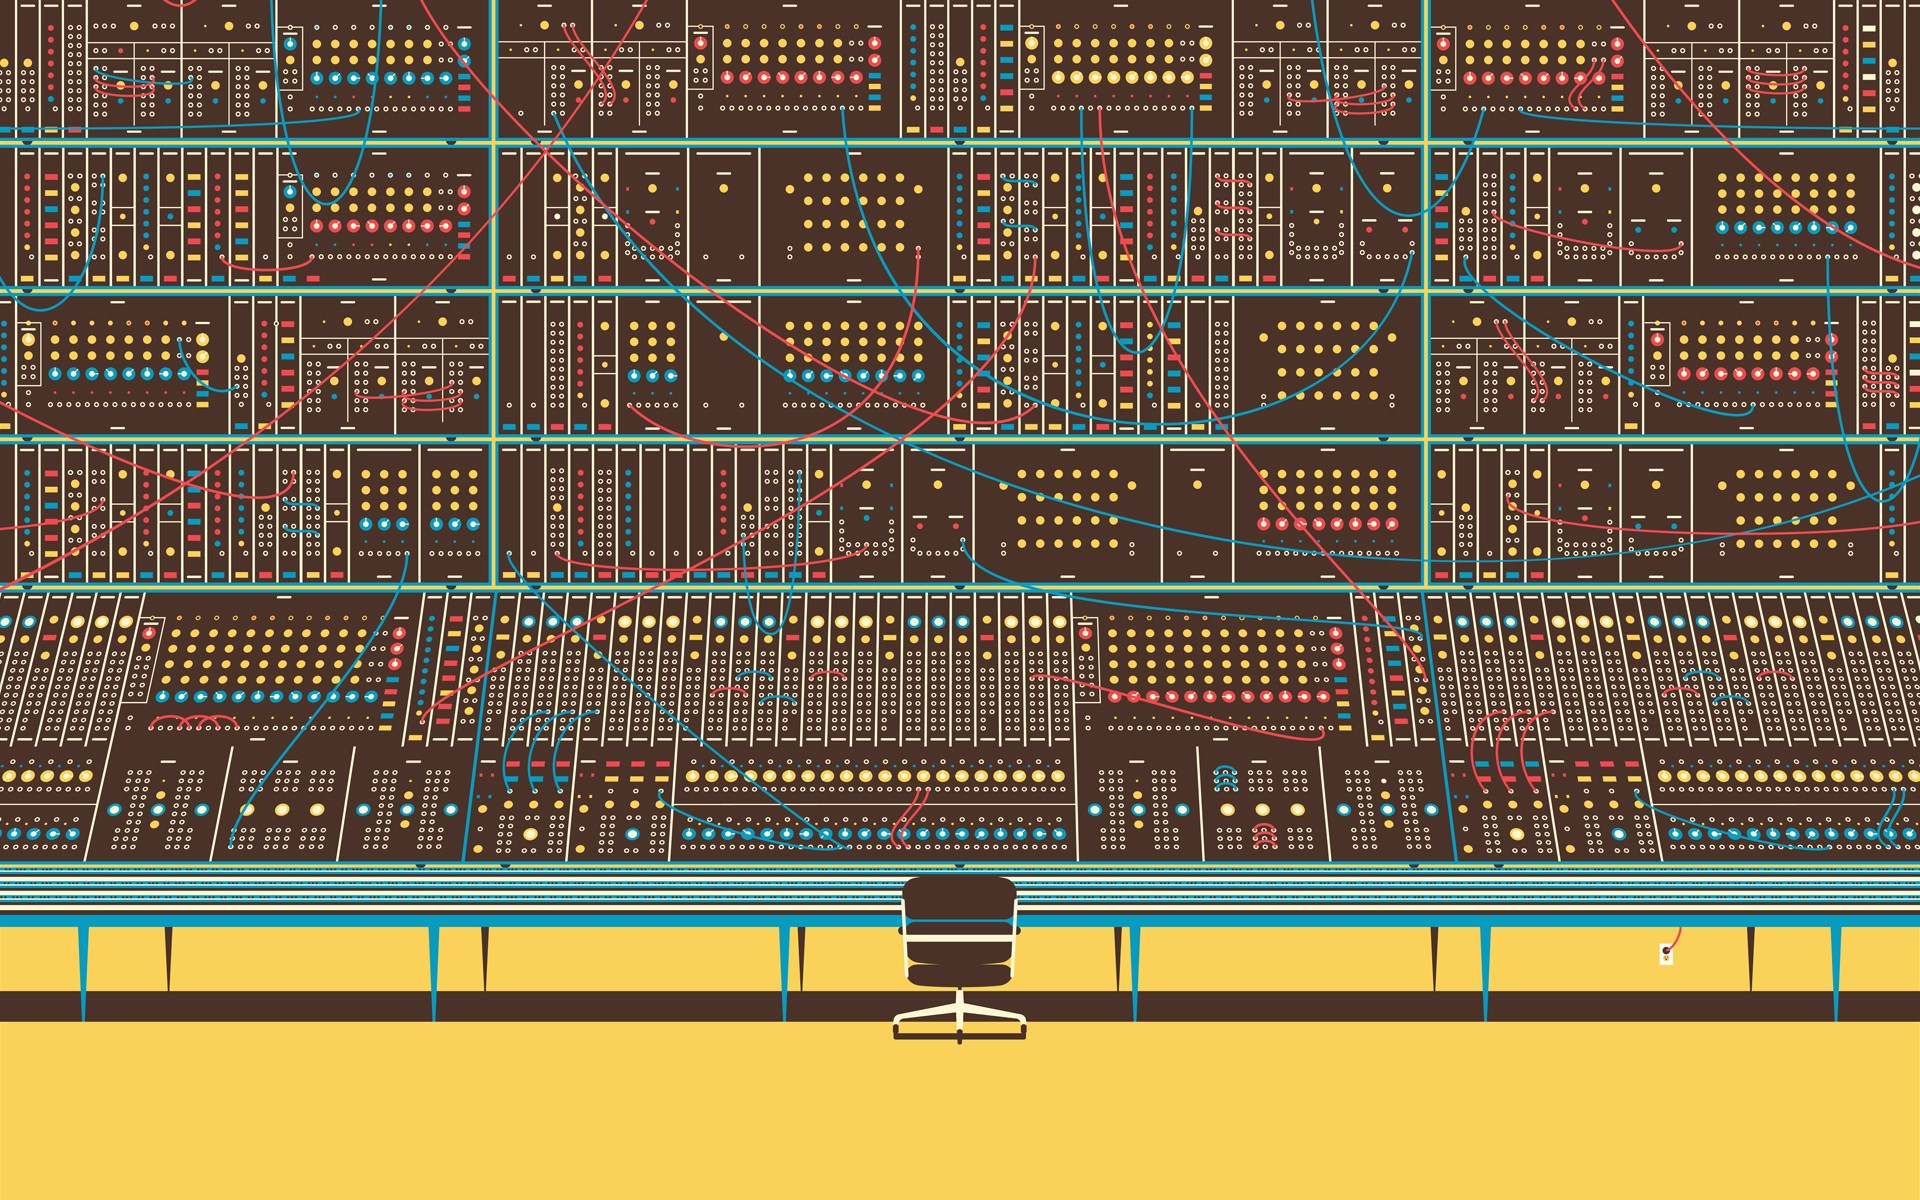 1920x1200 Wallpaper : digital art, music, pattern, technology, vintage, synthesizer, moog, design, screenshot, px, electronic instrument CoolWallpapers 569763 HD Wallpapers